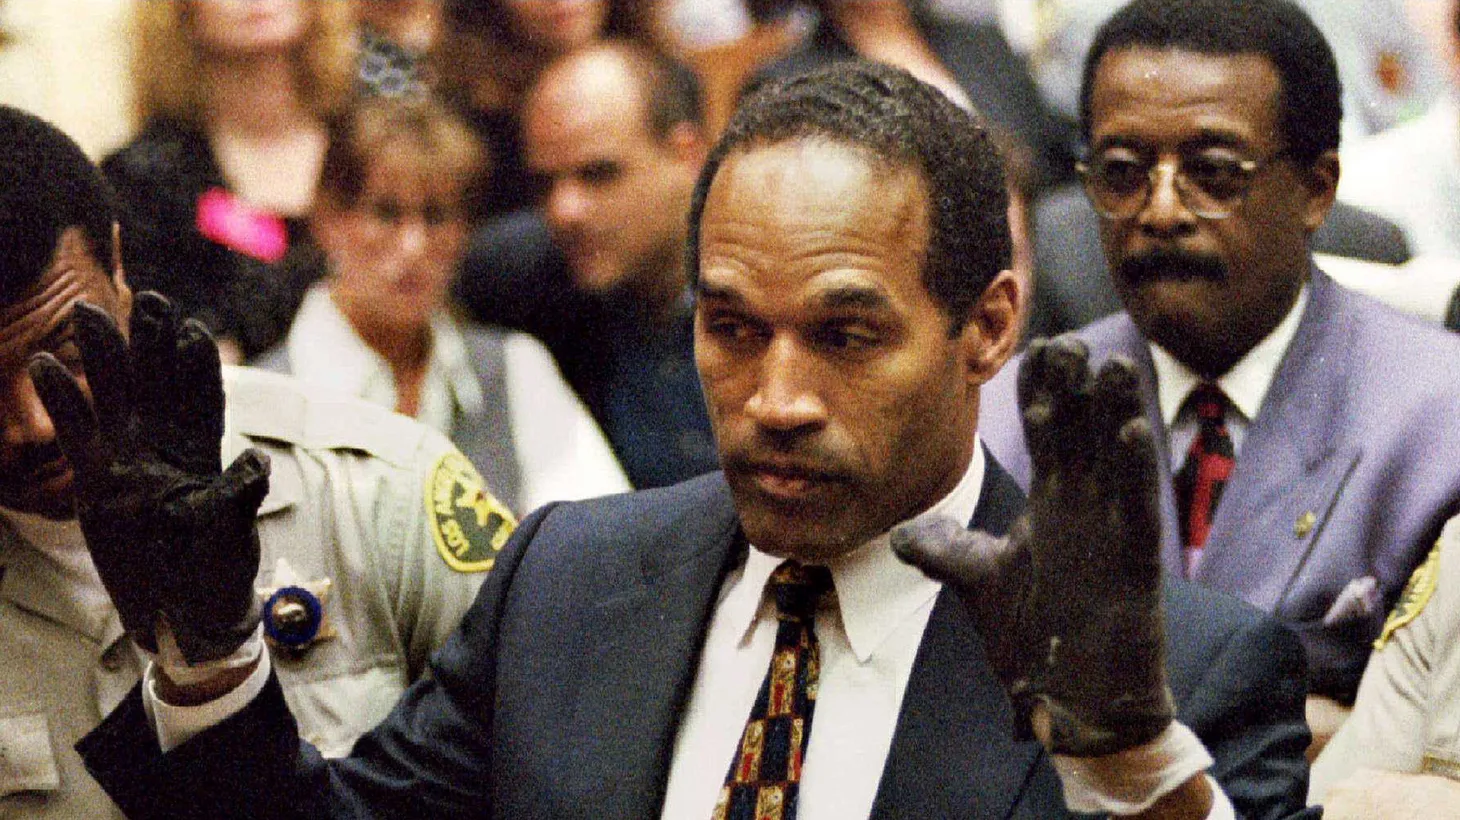 O.J. Simpson, wearing the blood-stained gloves found by Los Angeles Police and entered into evidence in Simpson's murder trial, displays his hands to the jury at the request of prosecutor Christopher Darden as his attorney Johnnie Cochran, Jr. (R.) looks on, June 15, 1995.